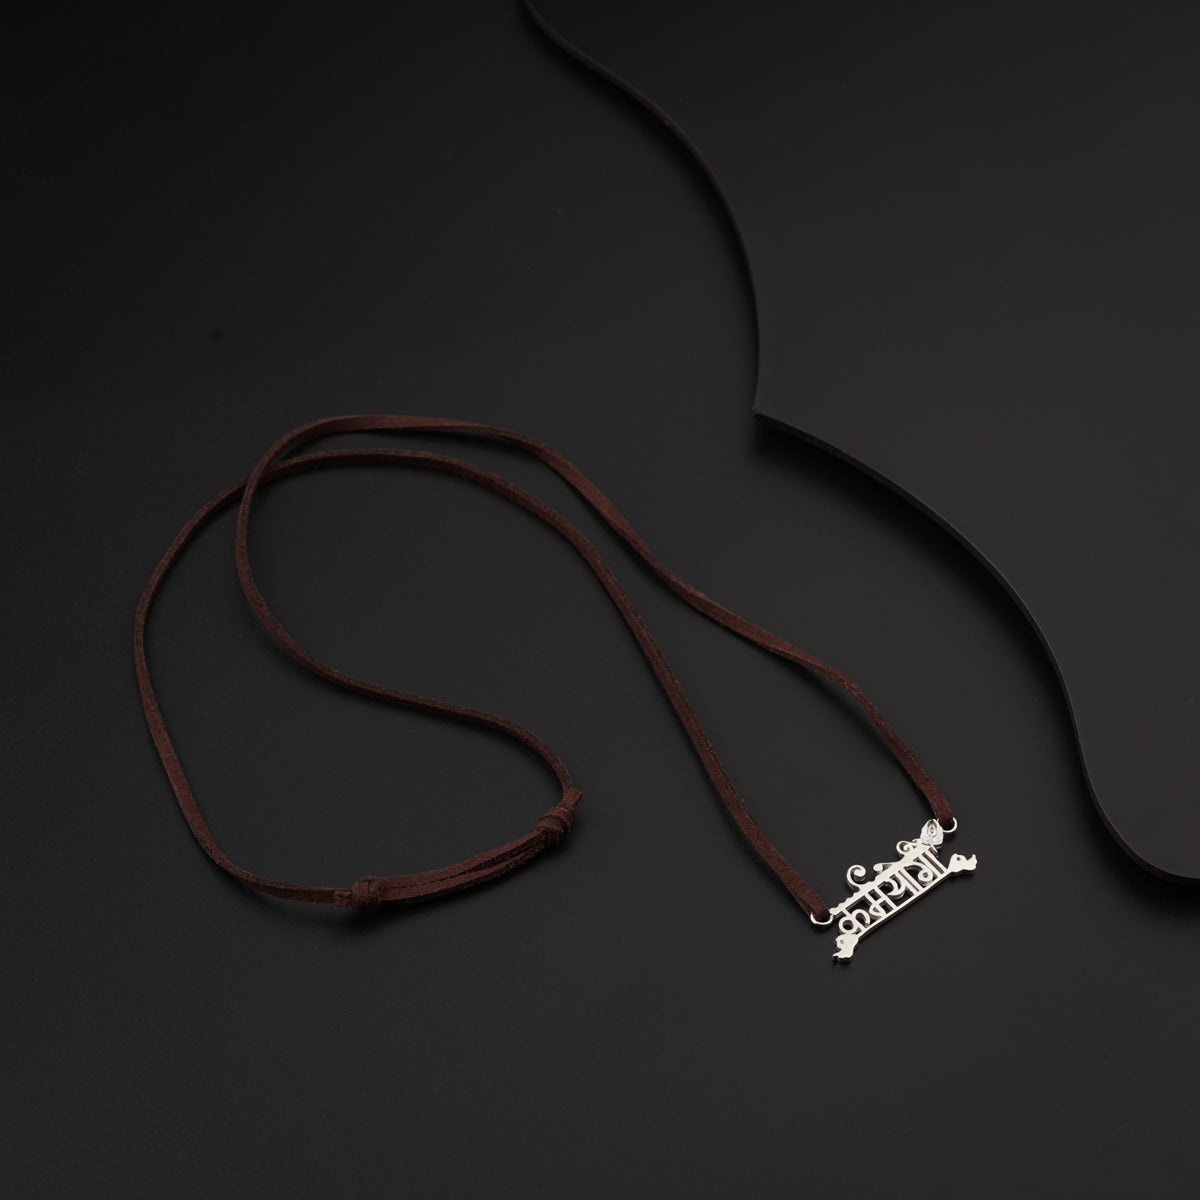 Karmayogi (कर्मयोगी) Silver Necklace with Suede Cord